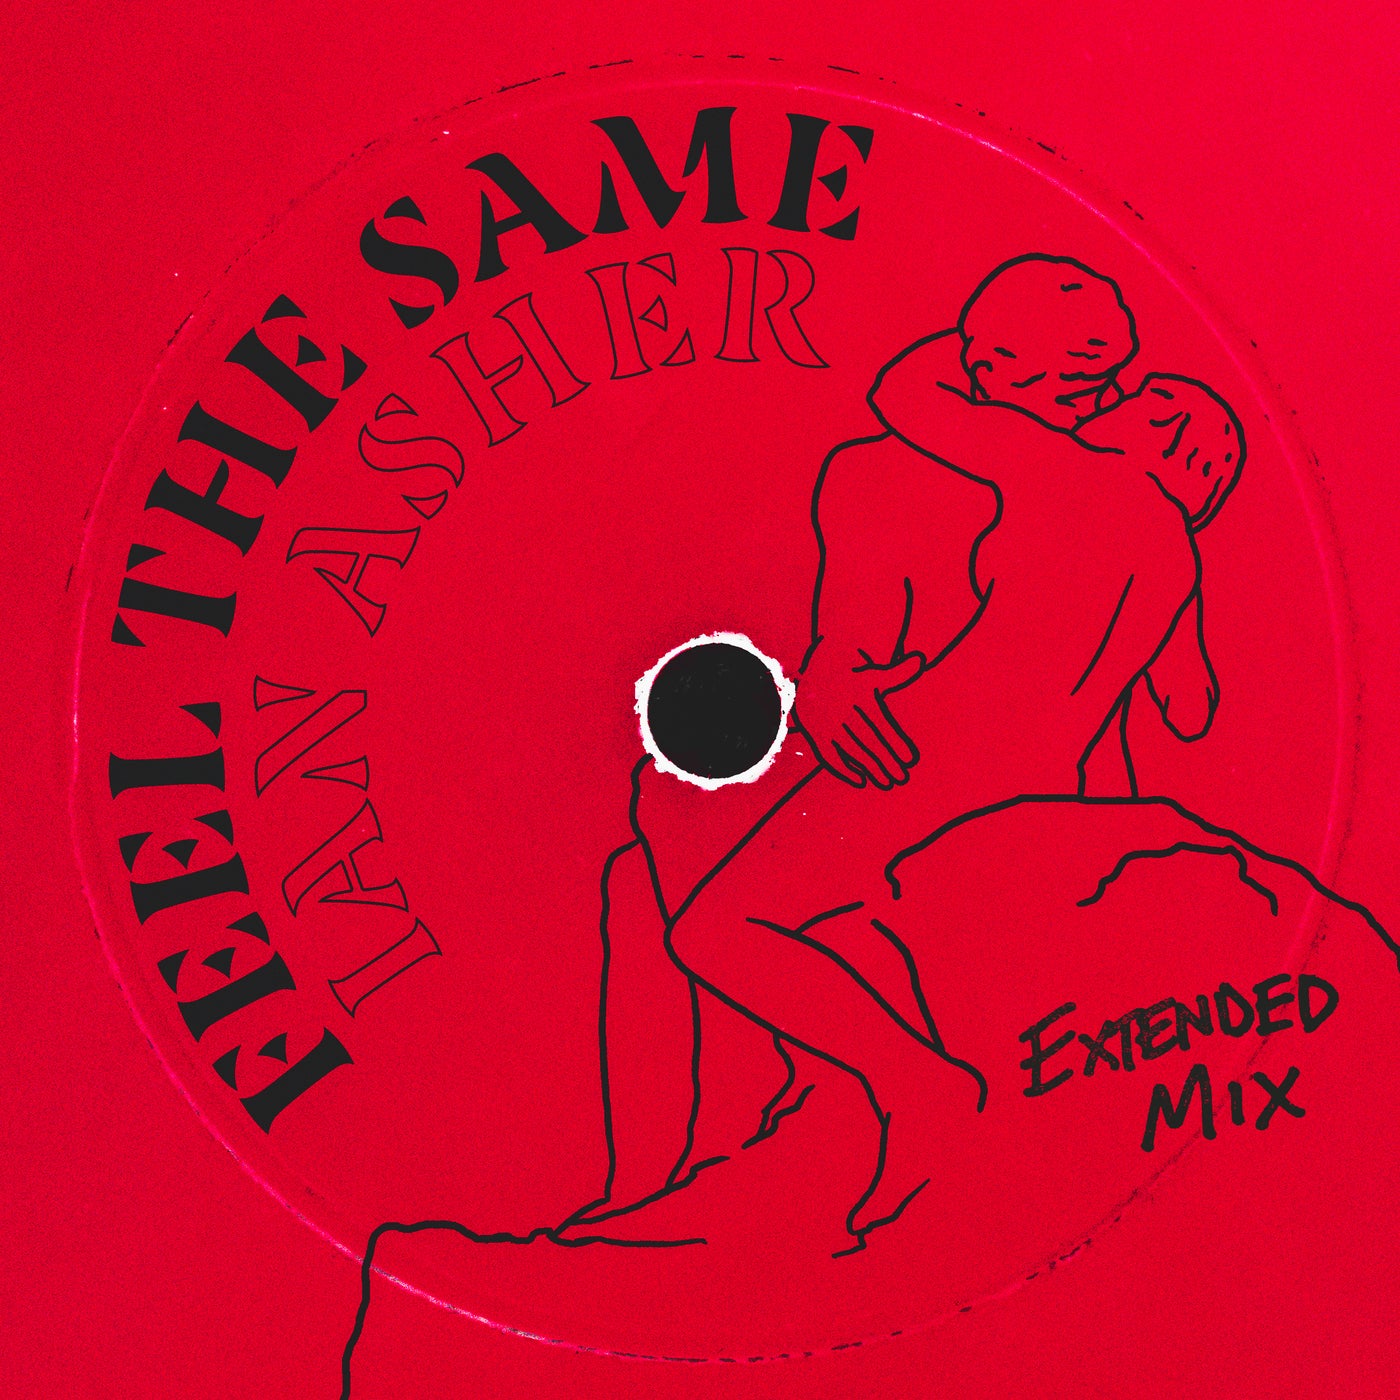 Feel The Same - Riva Starr Extended remix